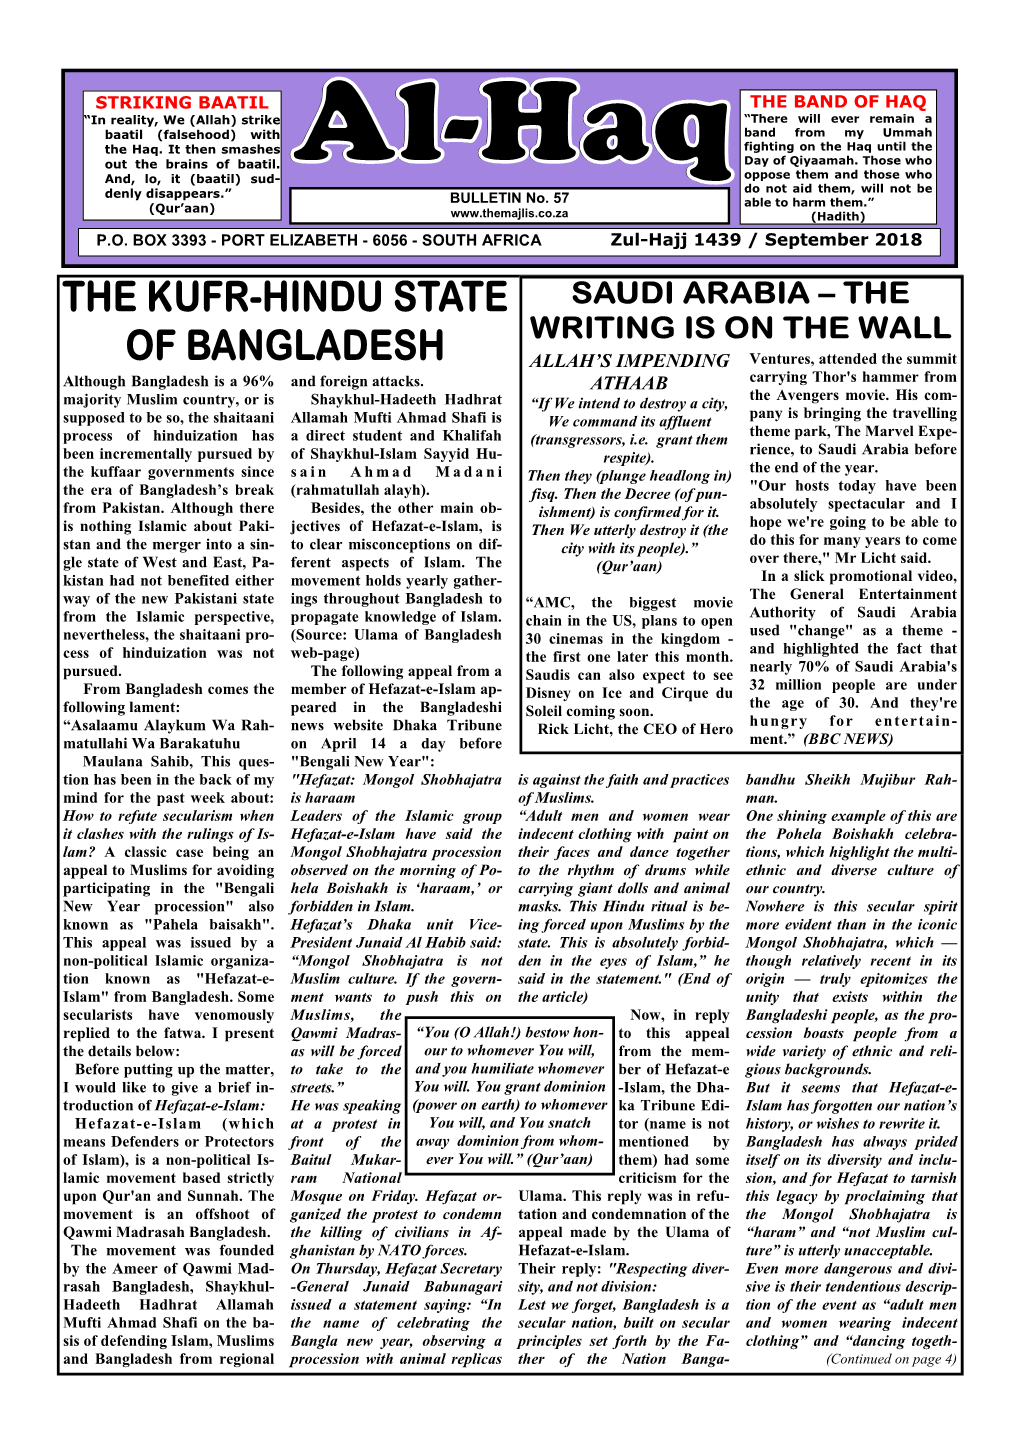 Al Haq Bulletin 57 Page 1 STRIKING BAATIL the BAND of HAQ “In Reality, We (Allah) Strike “There Will Ever Remain a Baatil (Falsehood) with Band from My Ummah the Haq